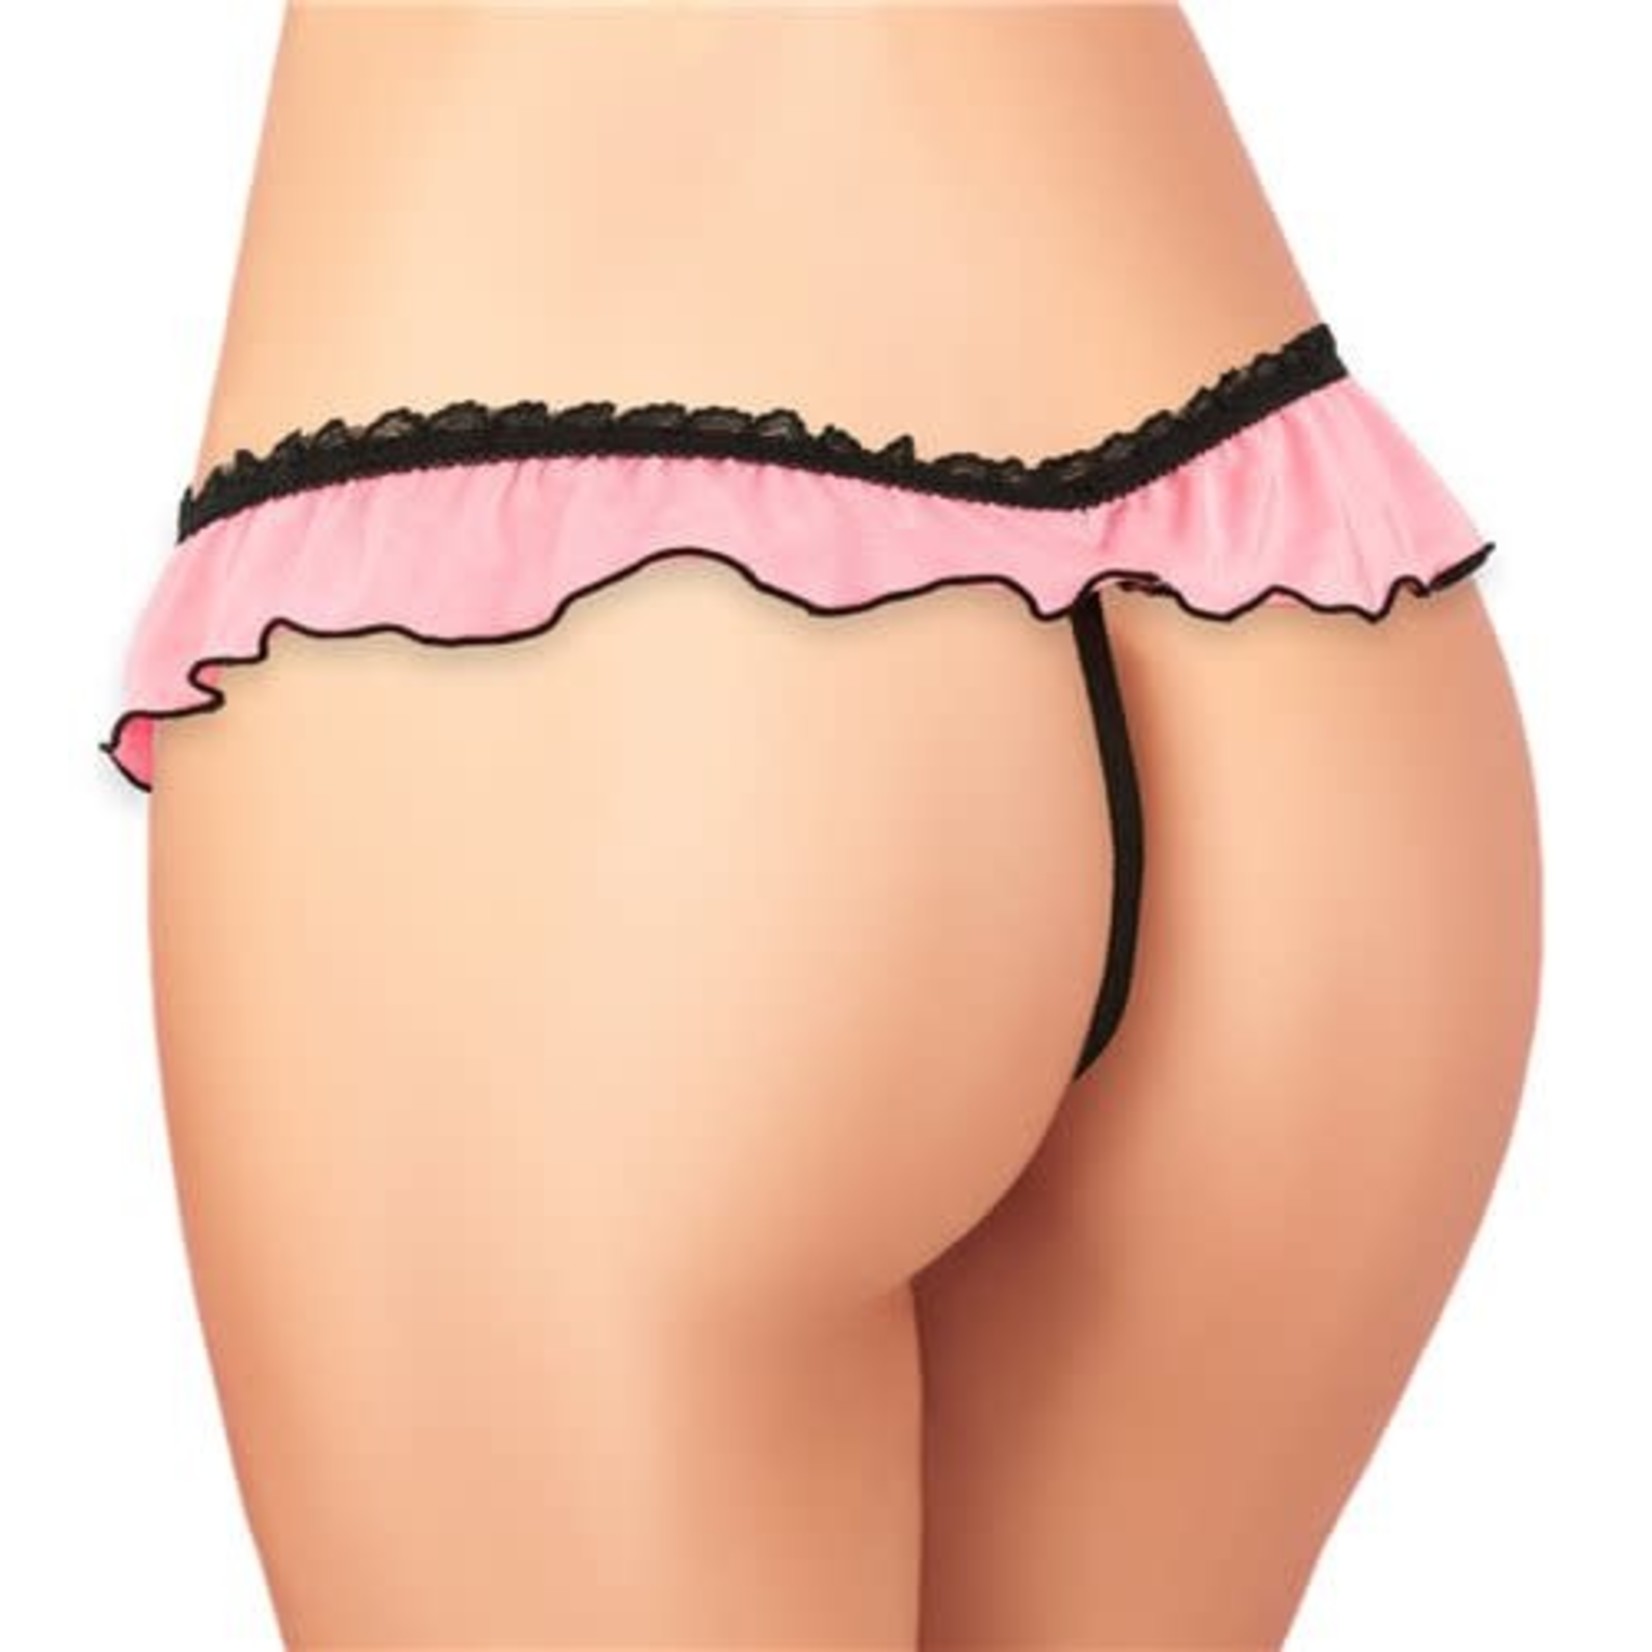 BLACK AND PINK CROTCHLESS PANTY - PINK AND BLACK - ONE SIZE